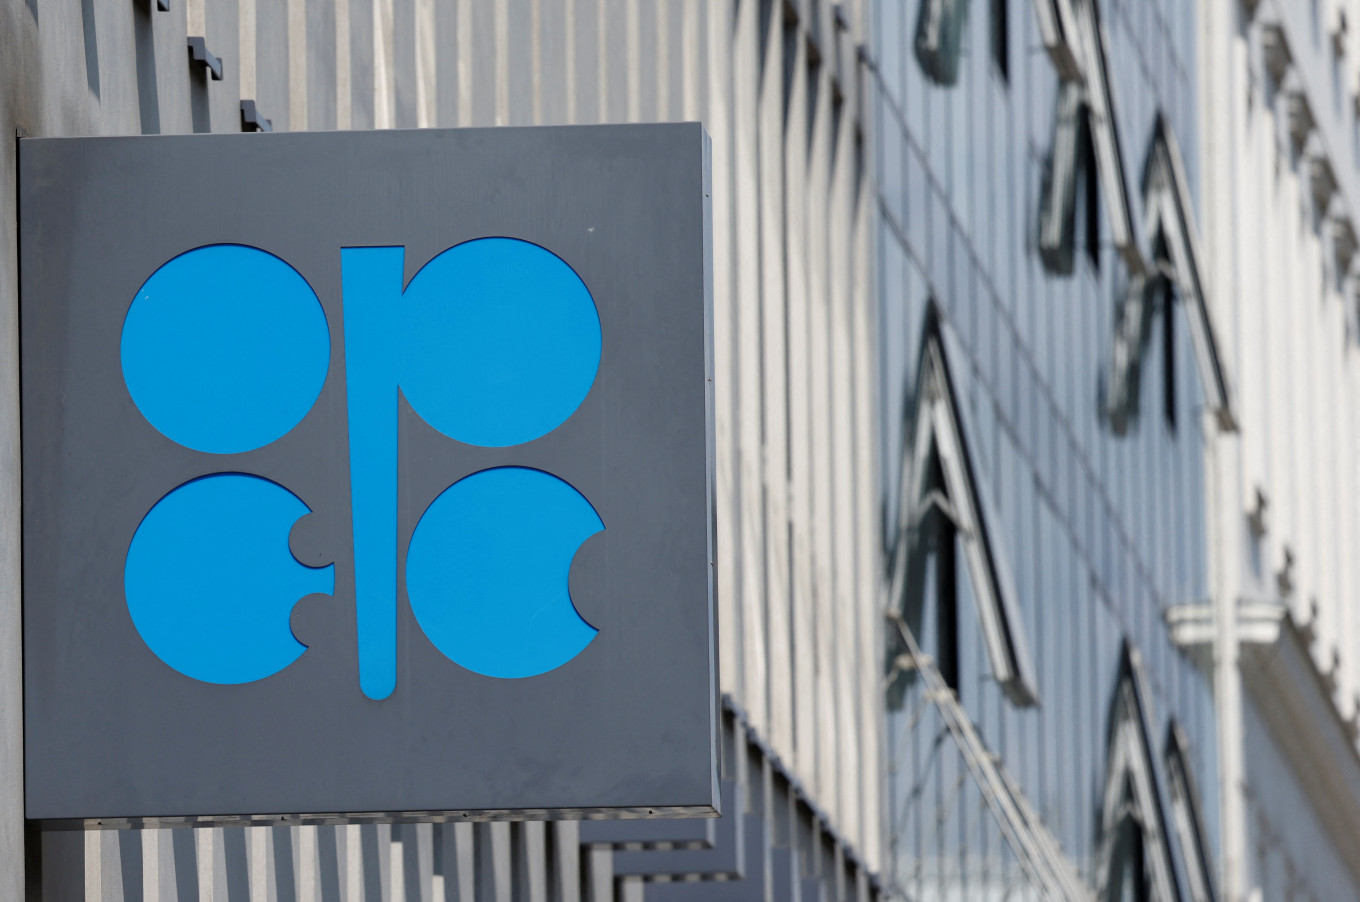 Two sources predict that OPEC+ will extend oil production cuts until 2025 – Economy